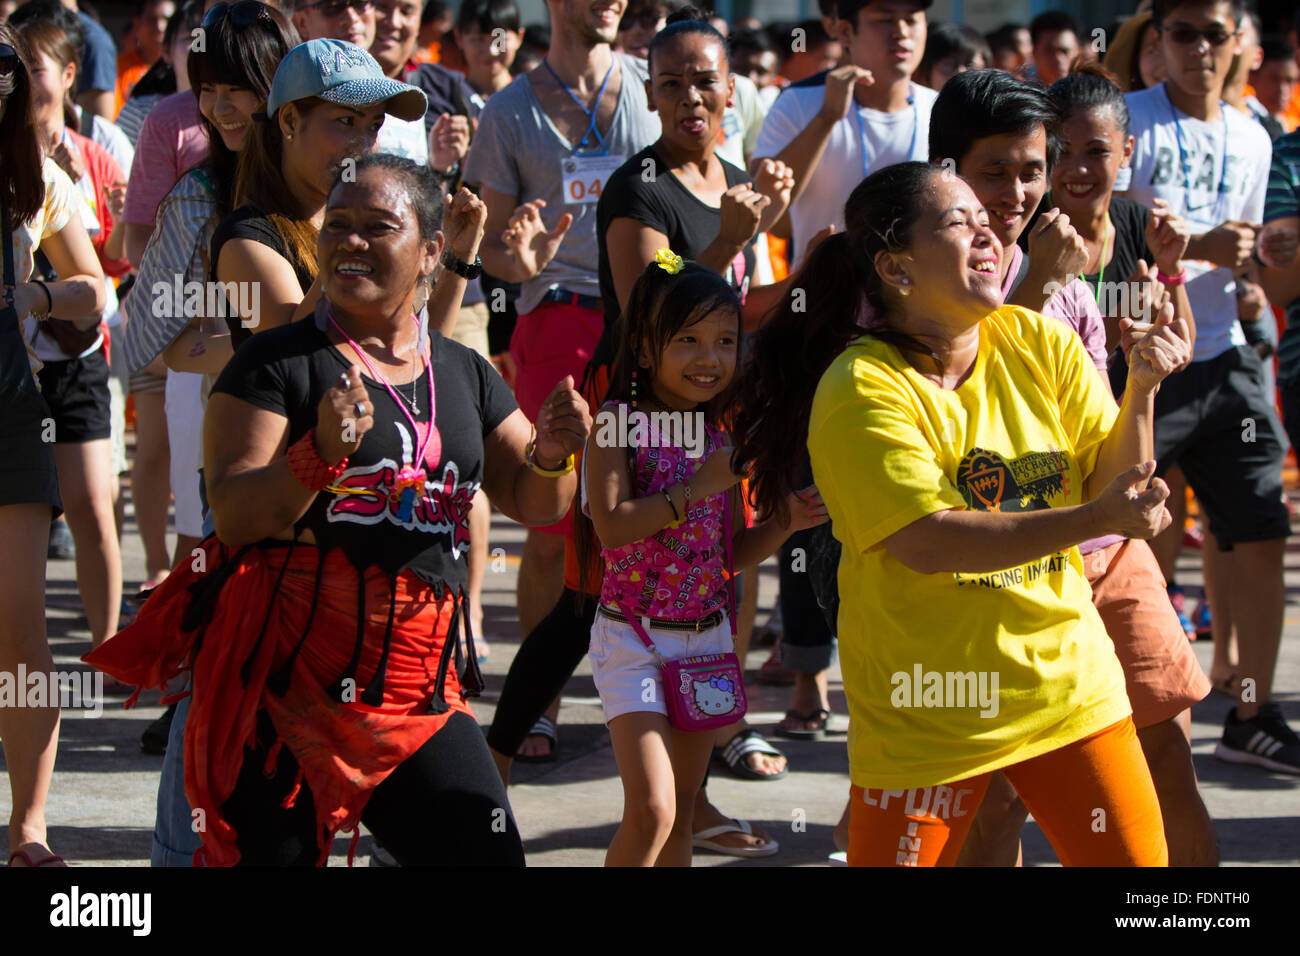 Relatives & visitors join in with Dancing Inmates at the Cebu Maximum Security Prison,Cebu City,Philippines Stock Photo